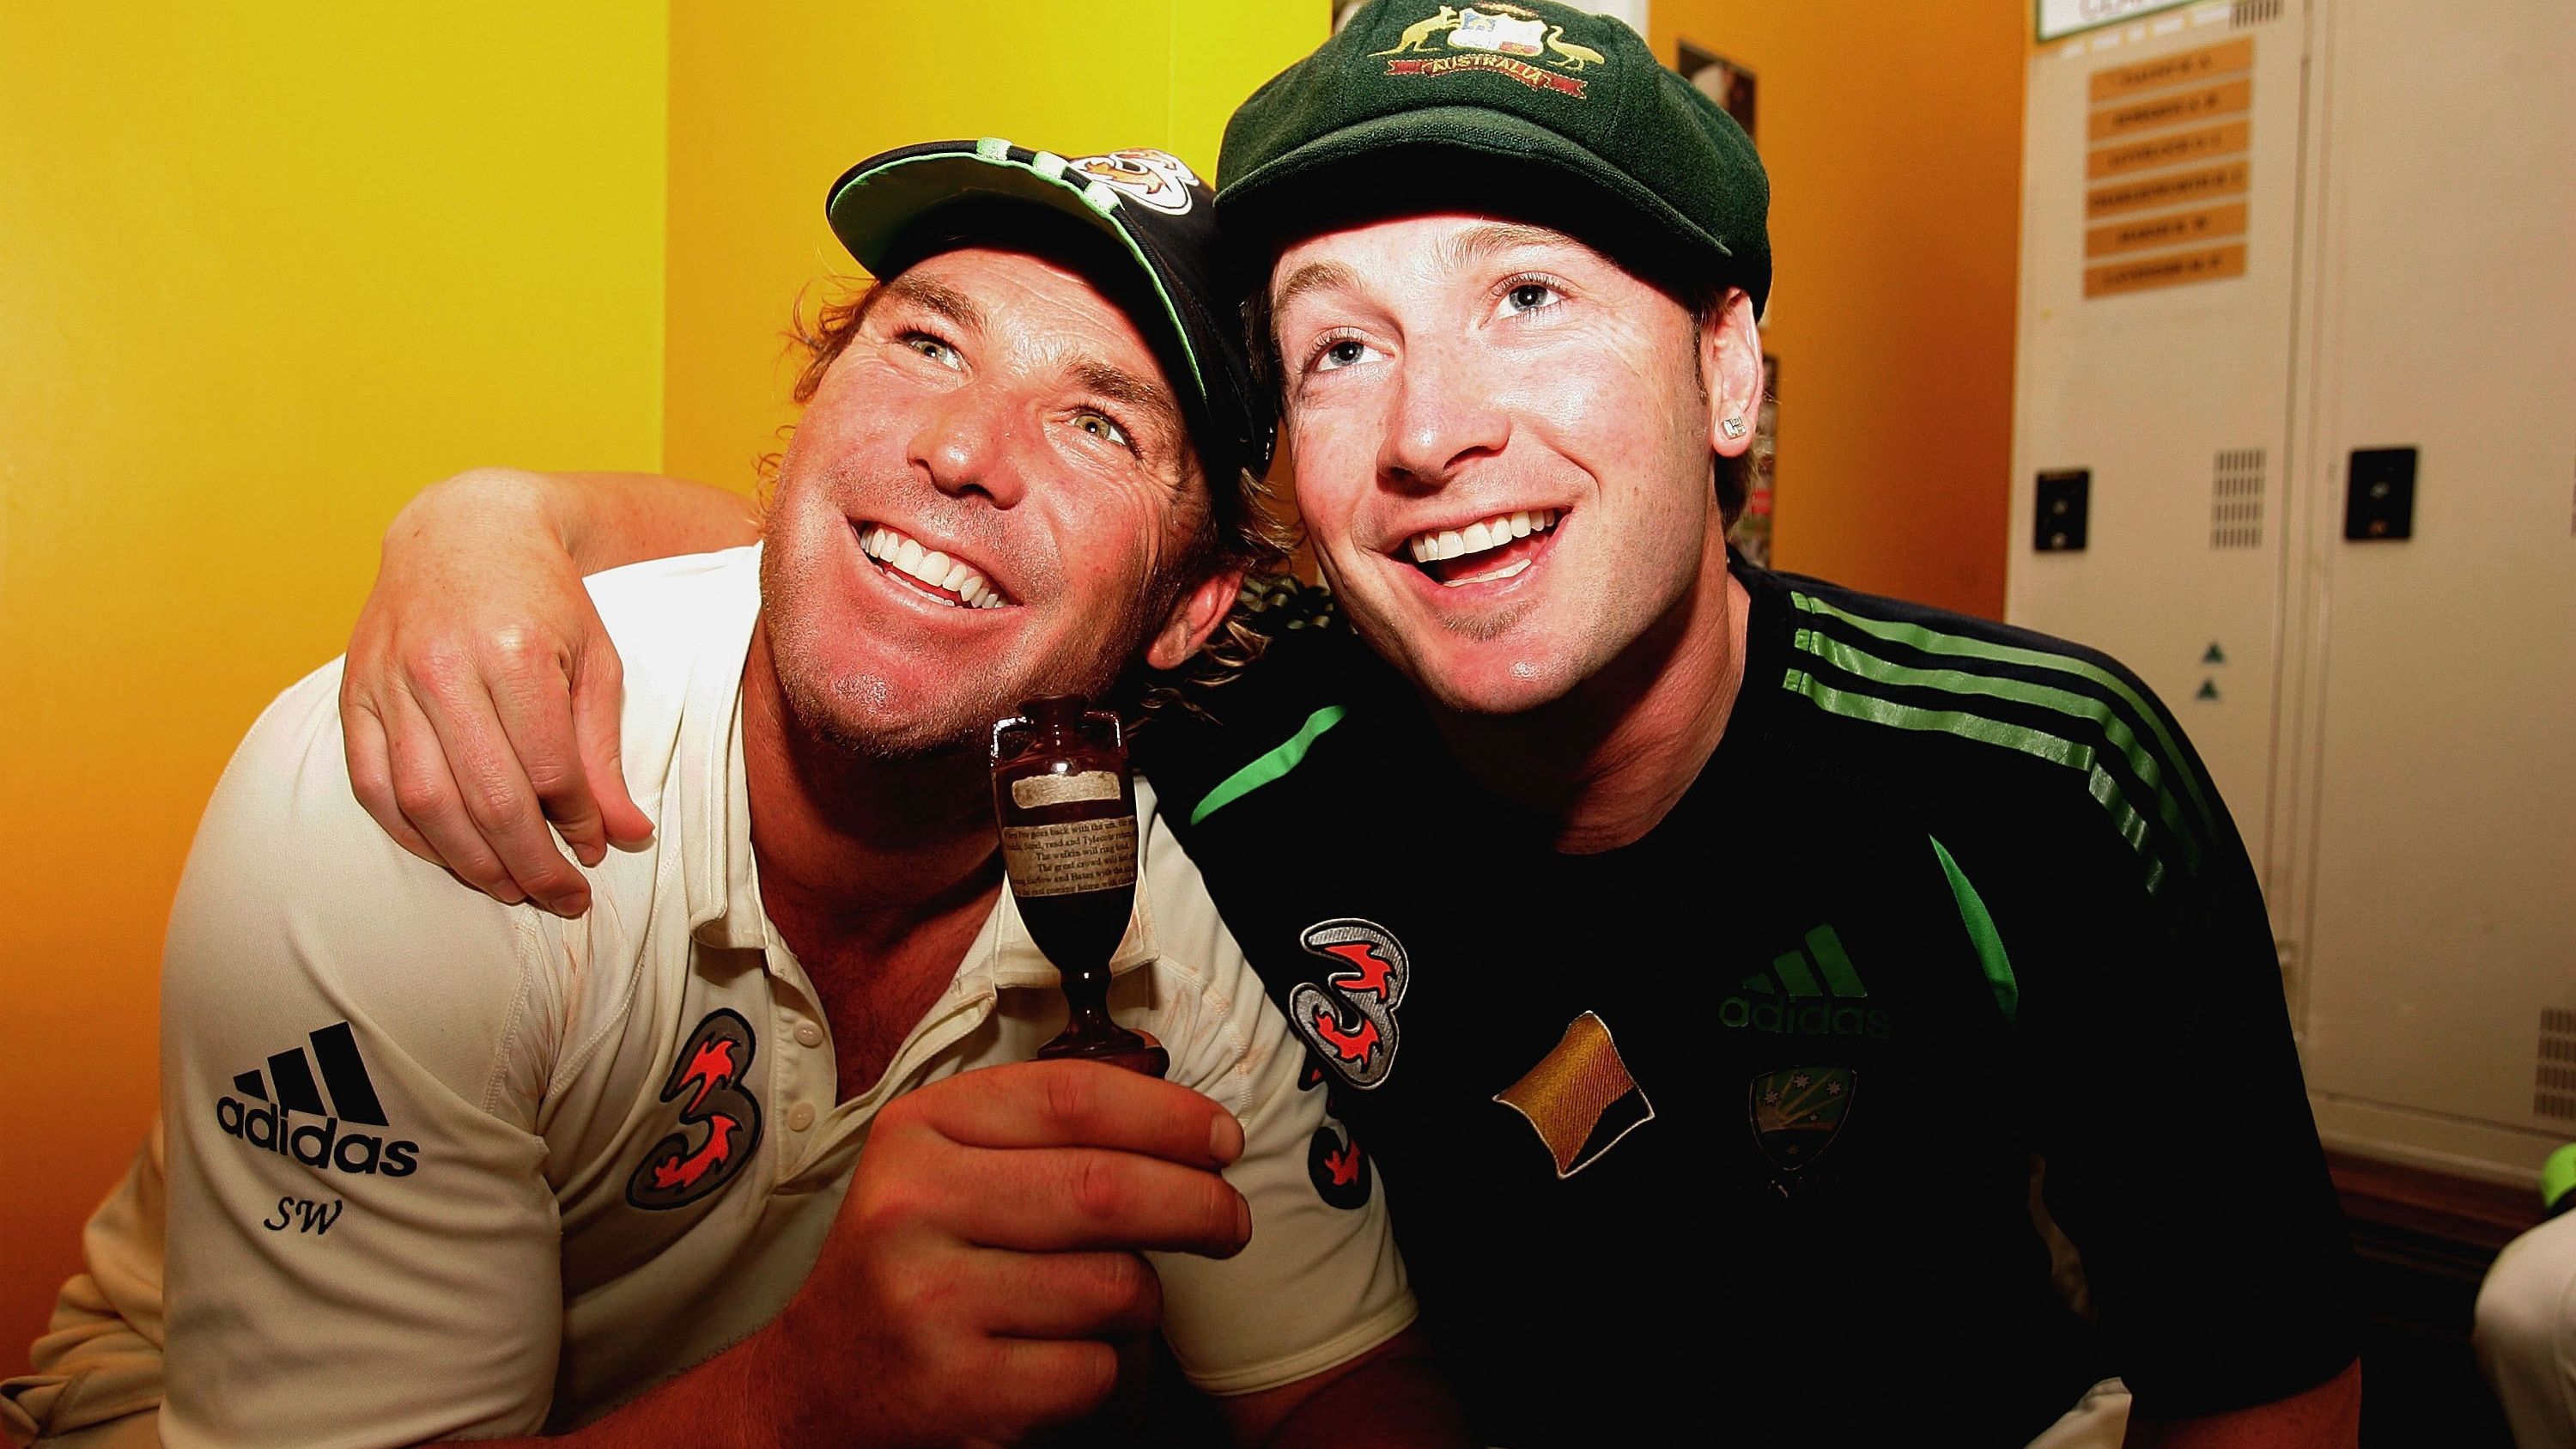 Shane Warne and Michael Clarke pose with a replica Ashes urn in 2006.